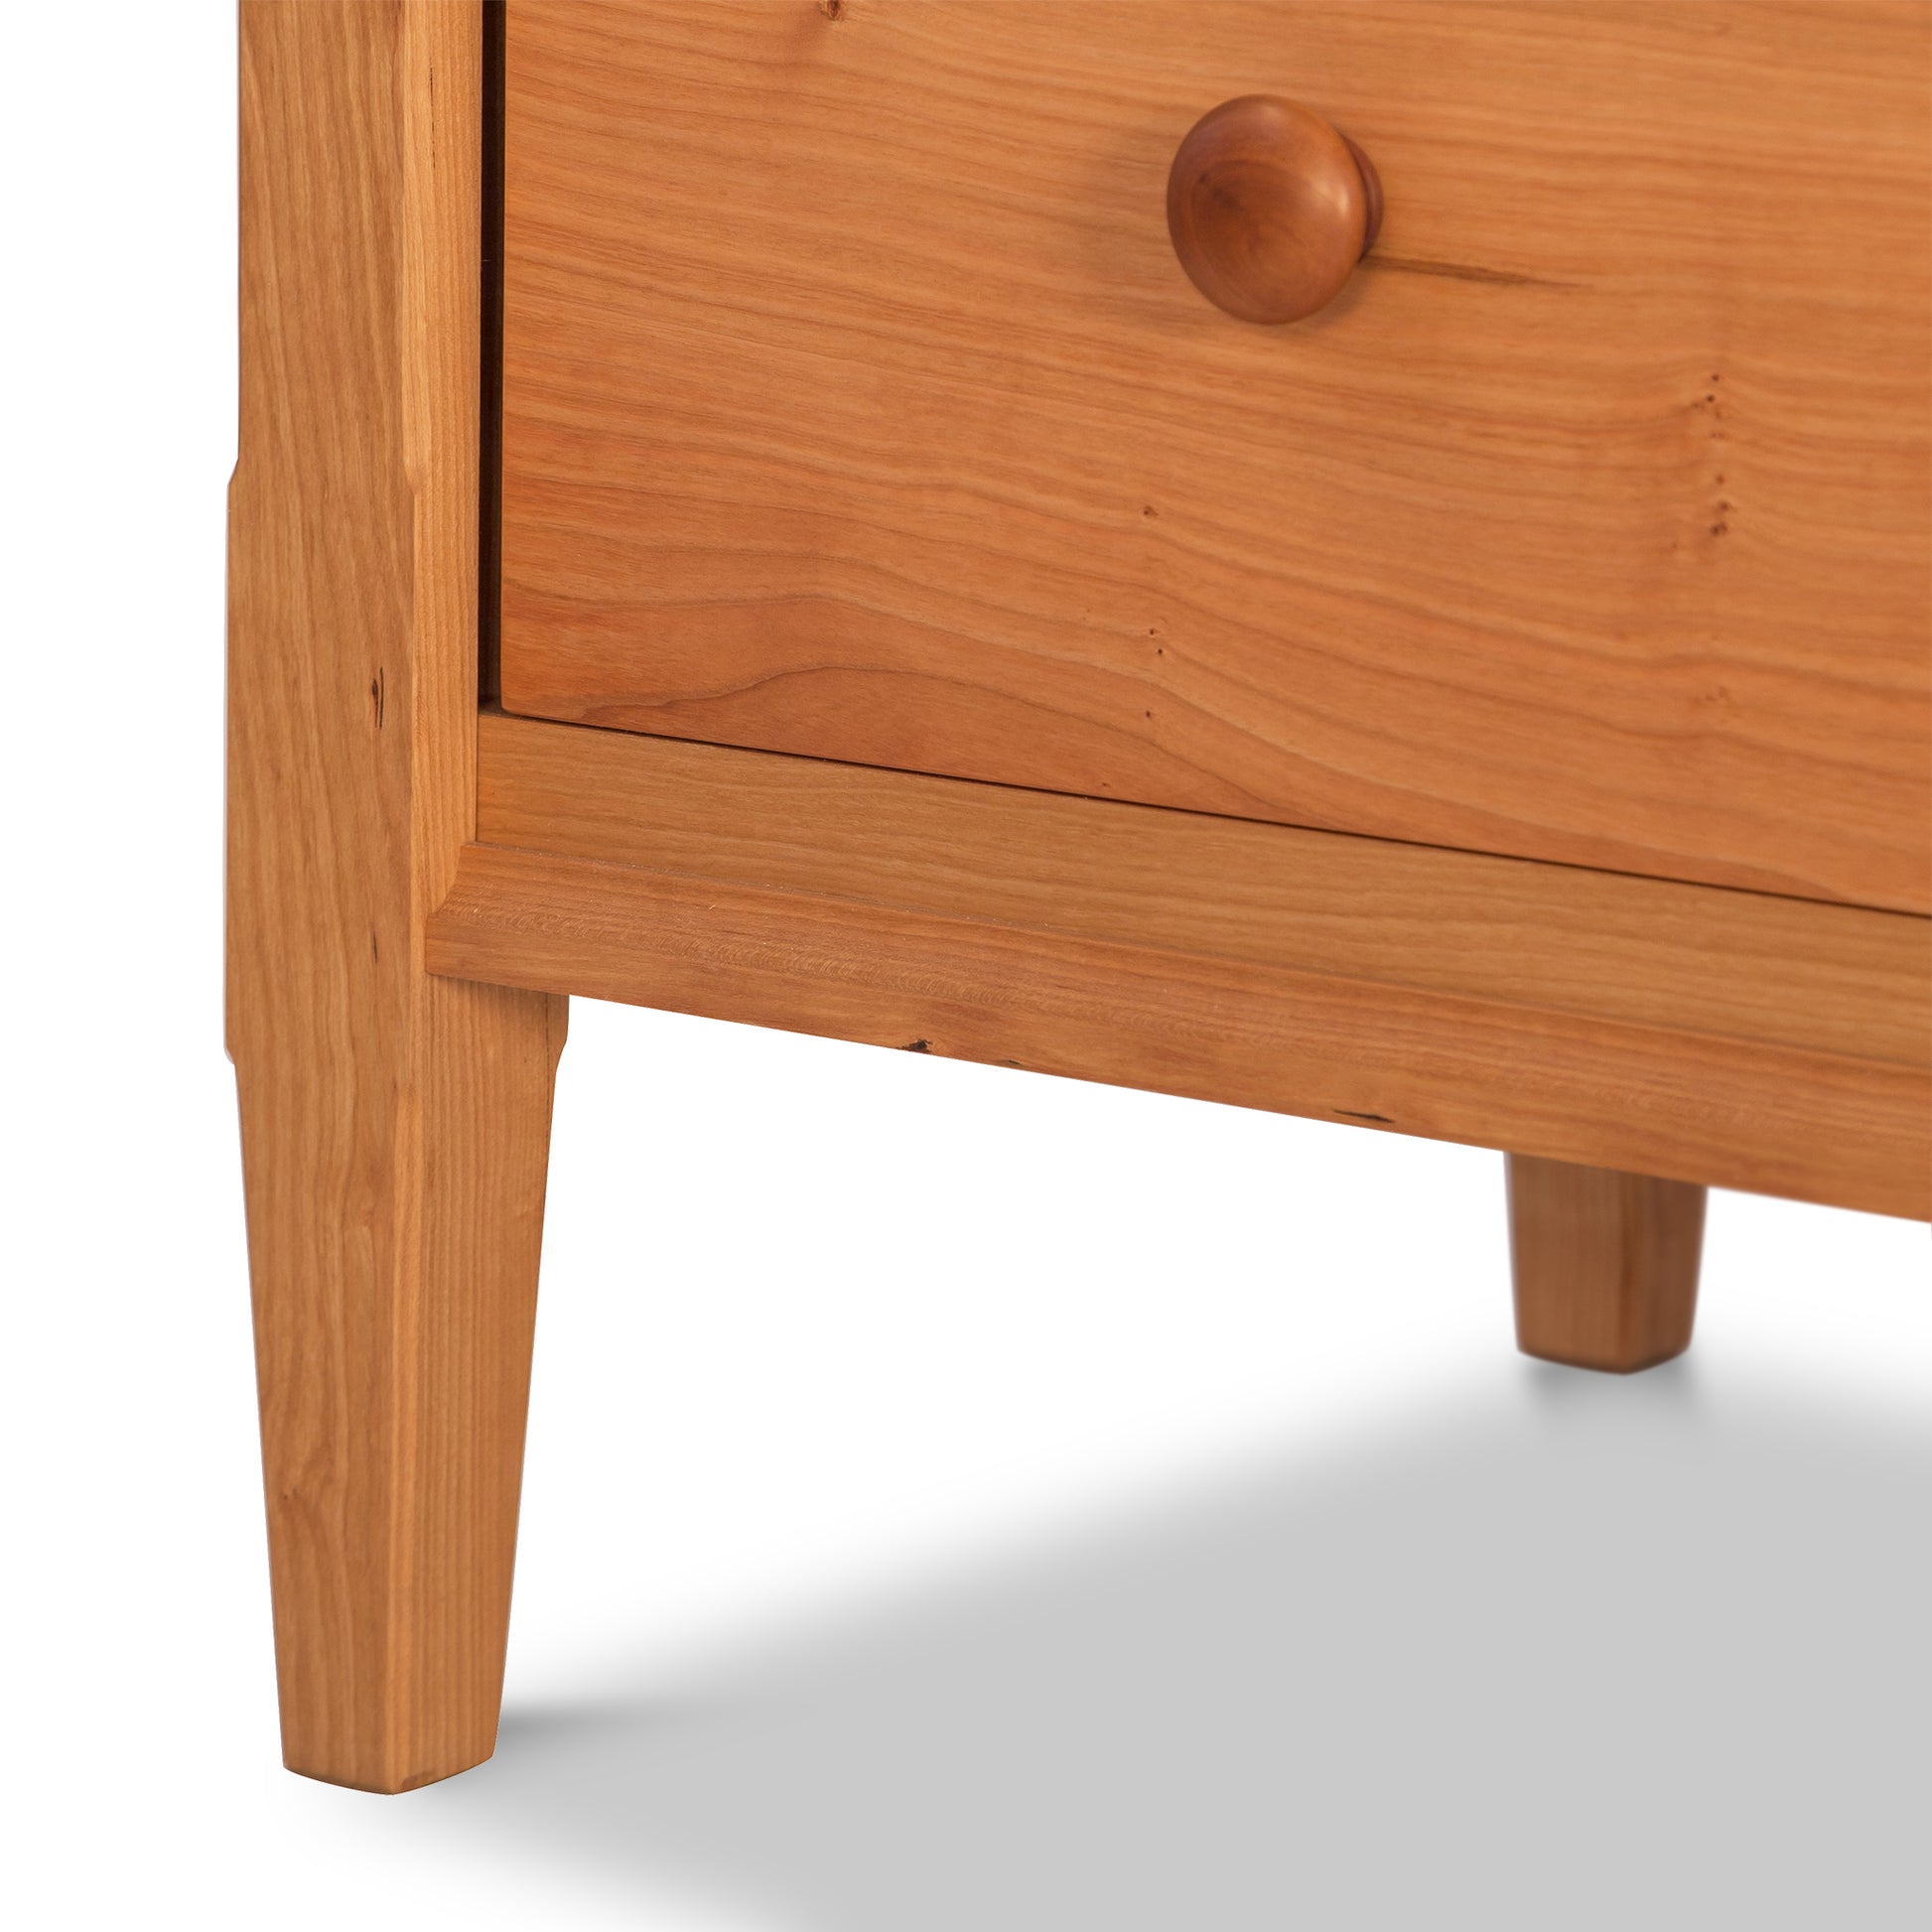 A close up of a Vermont Shaker Extra Wide Chest nightstand from Maple Corner Woodworks with two drawers made of natural hardwood furniture.